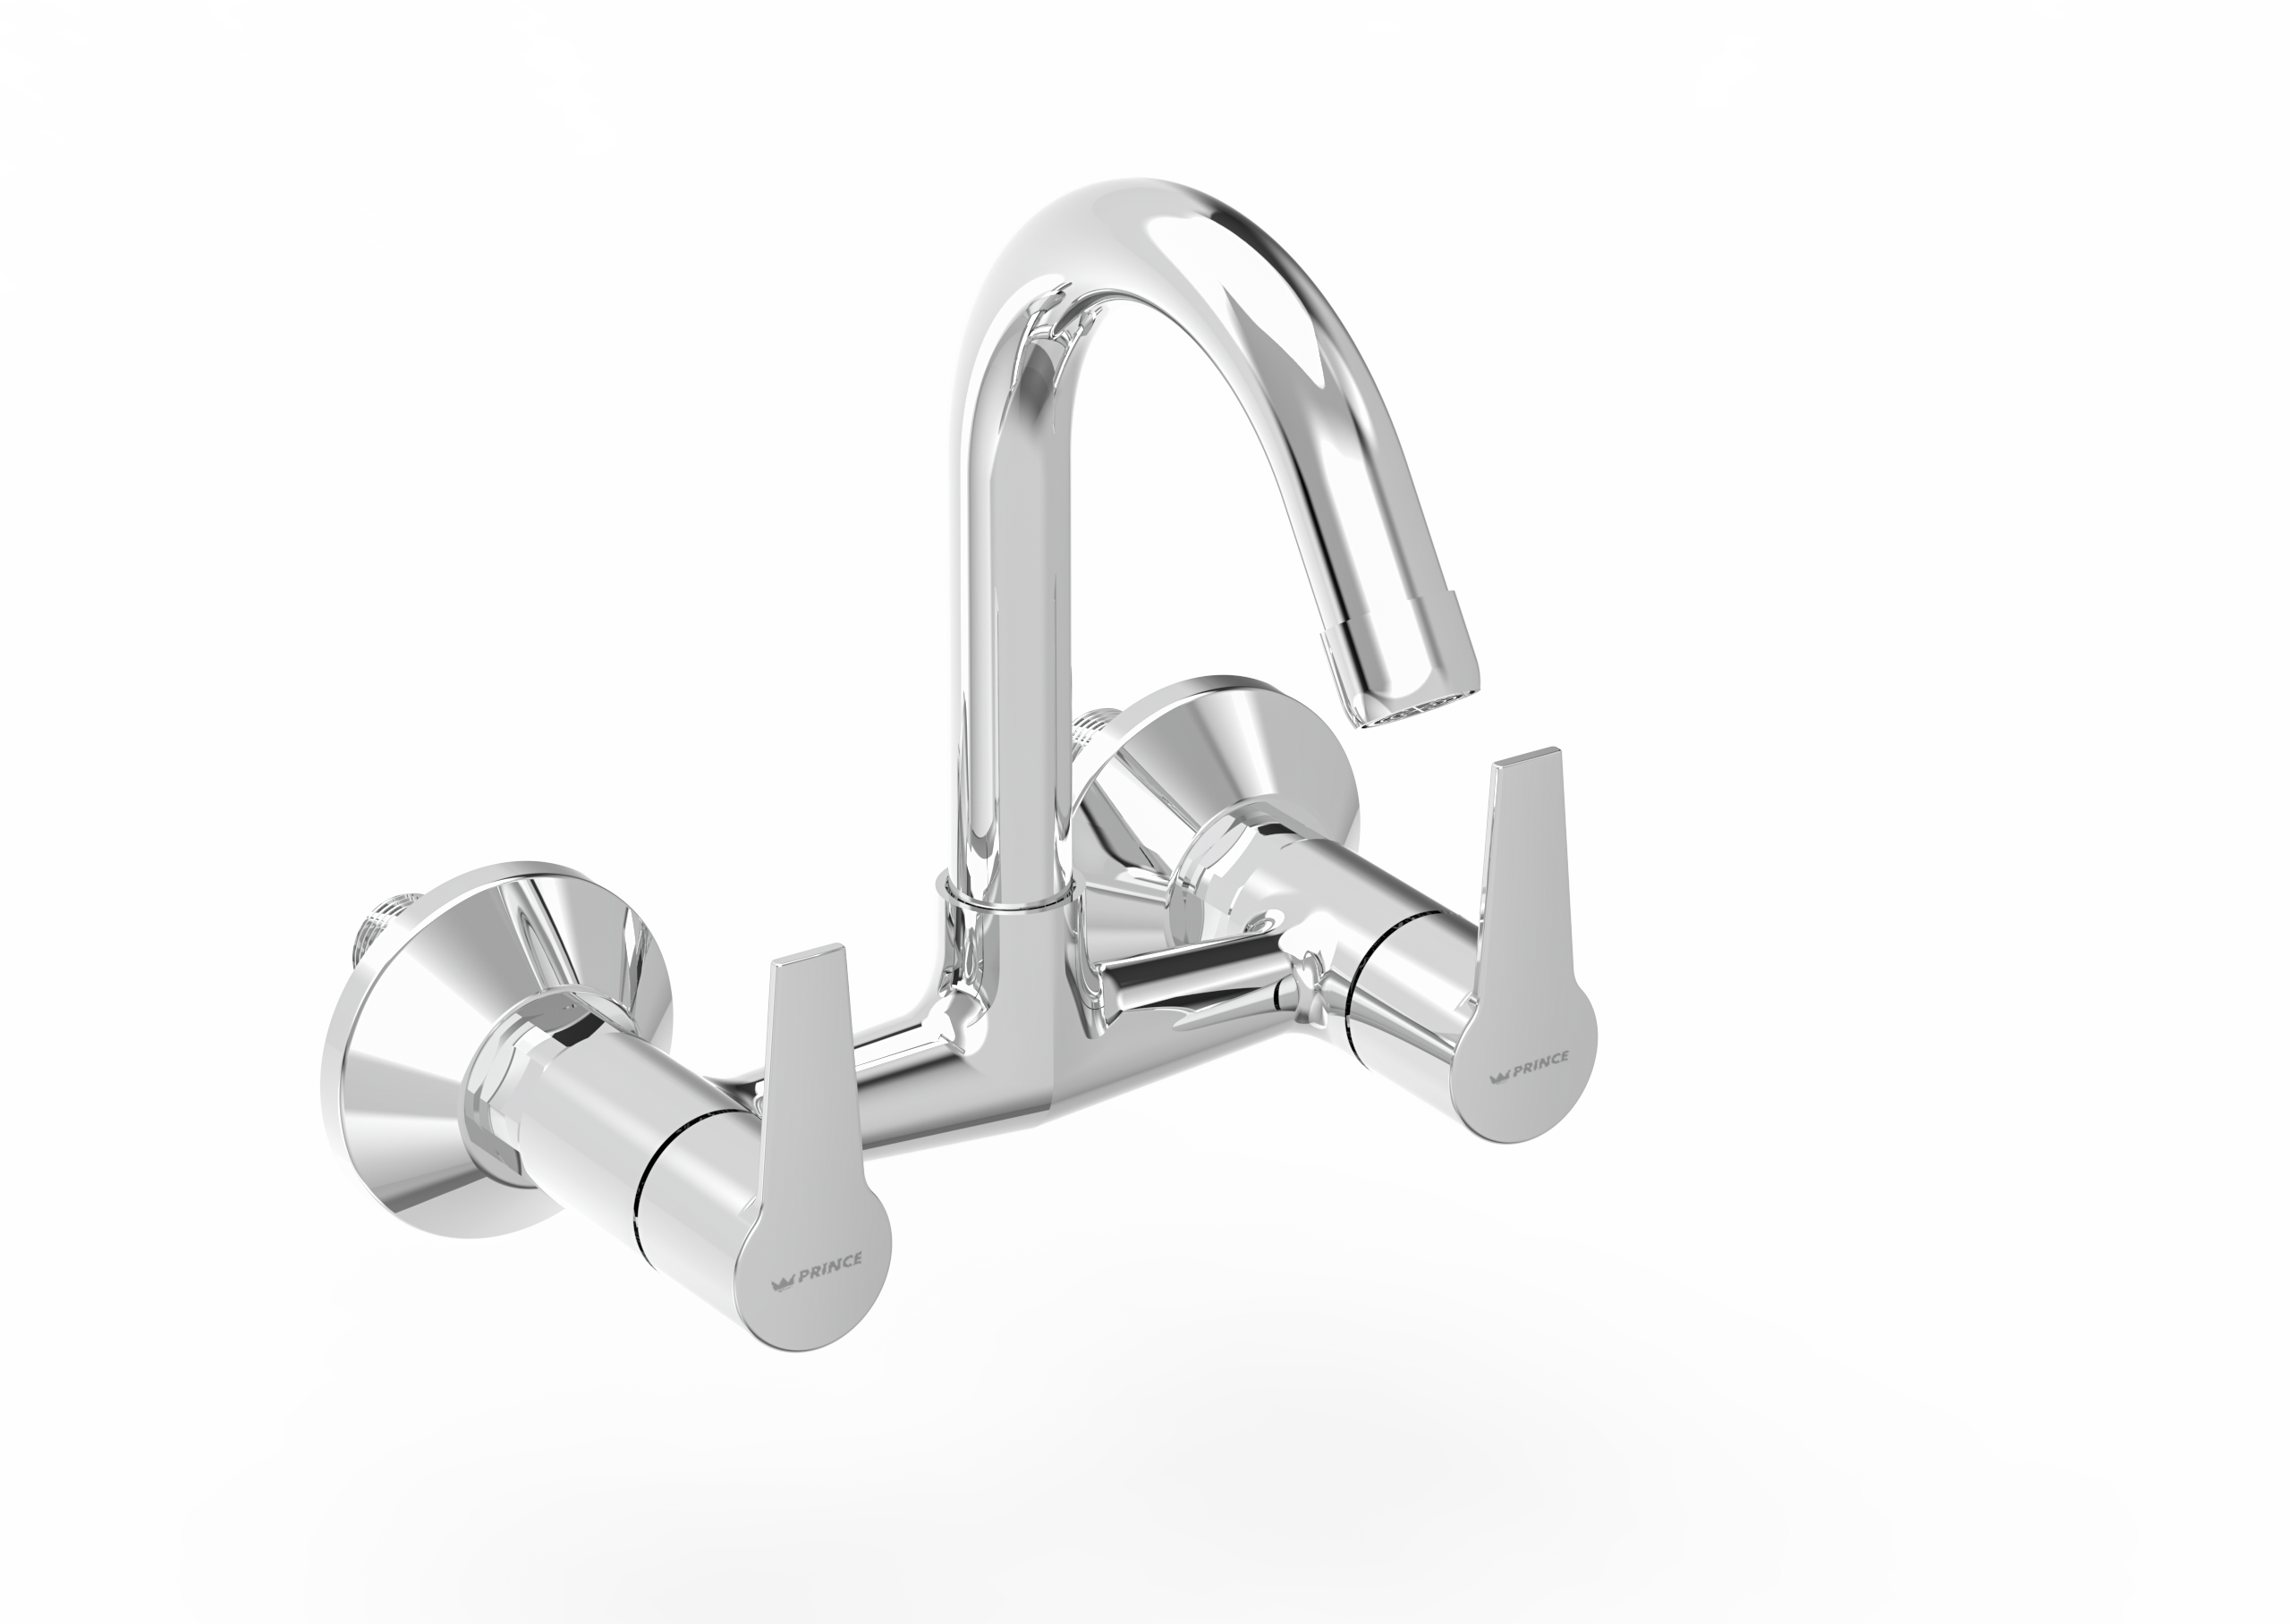 FKRIS CHGH221 Sink Mixer with swinging spout wall mounted